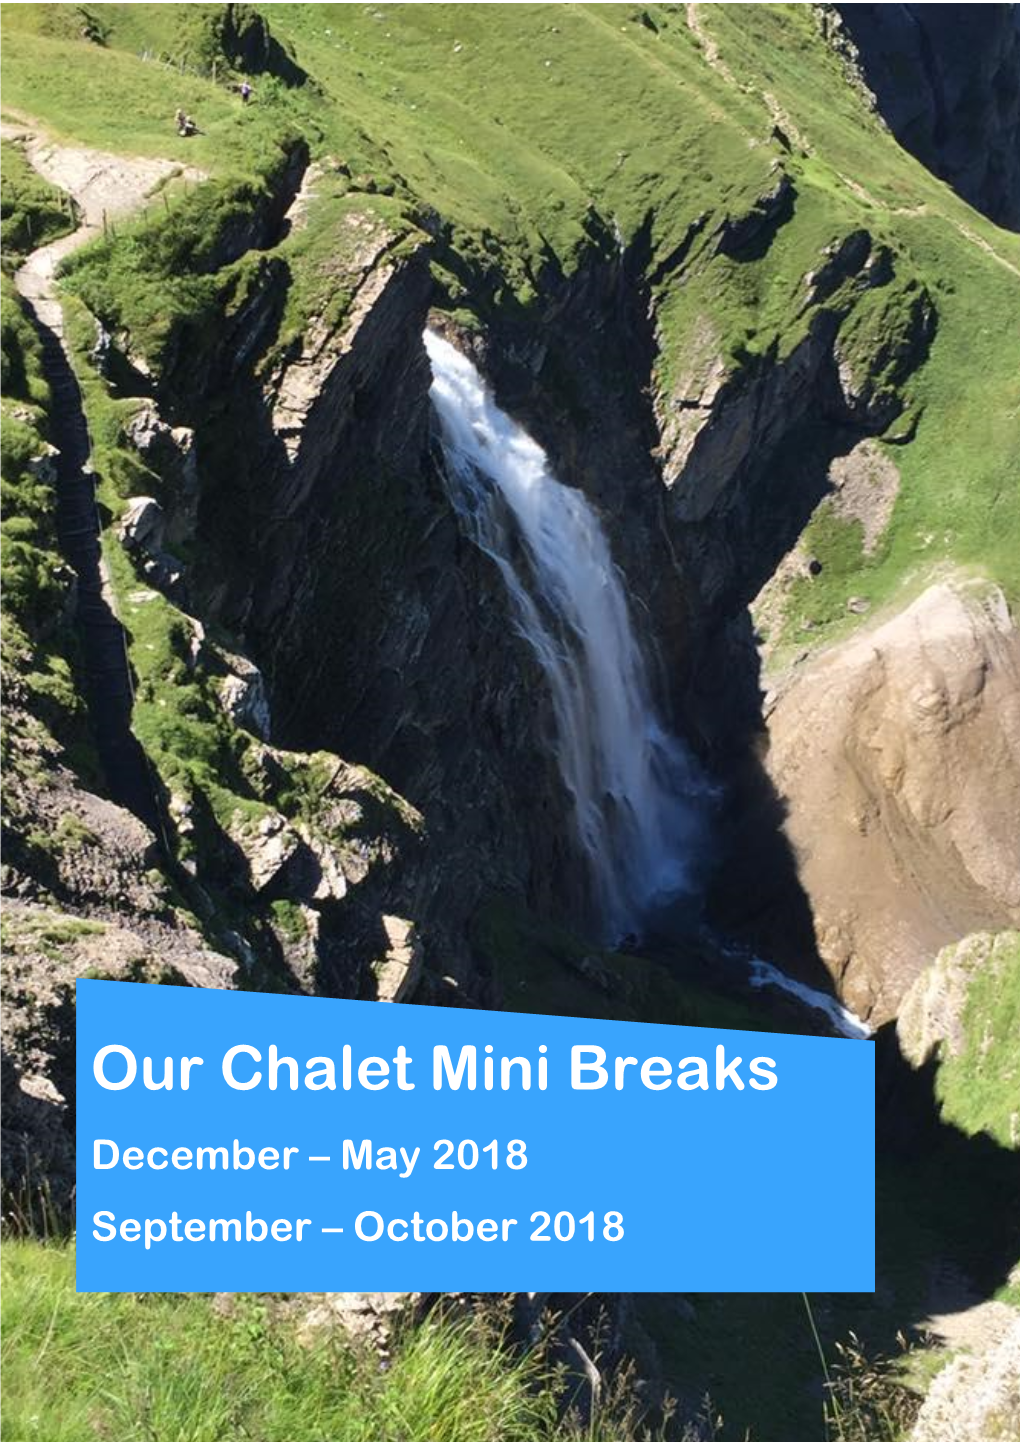 Our Chalet Mini Breaks December – May 2018